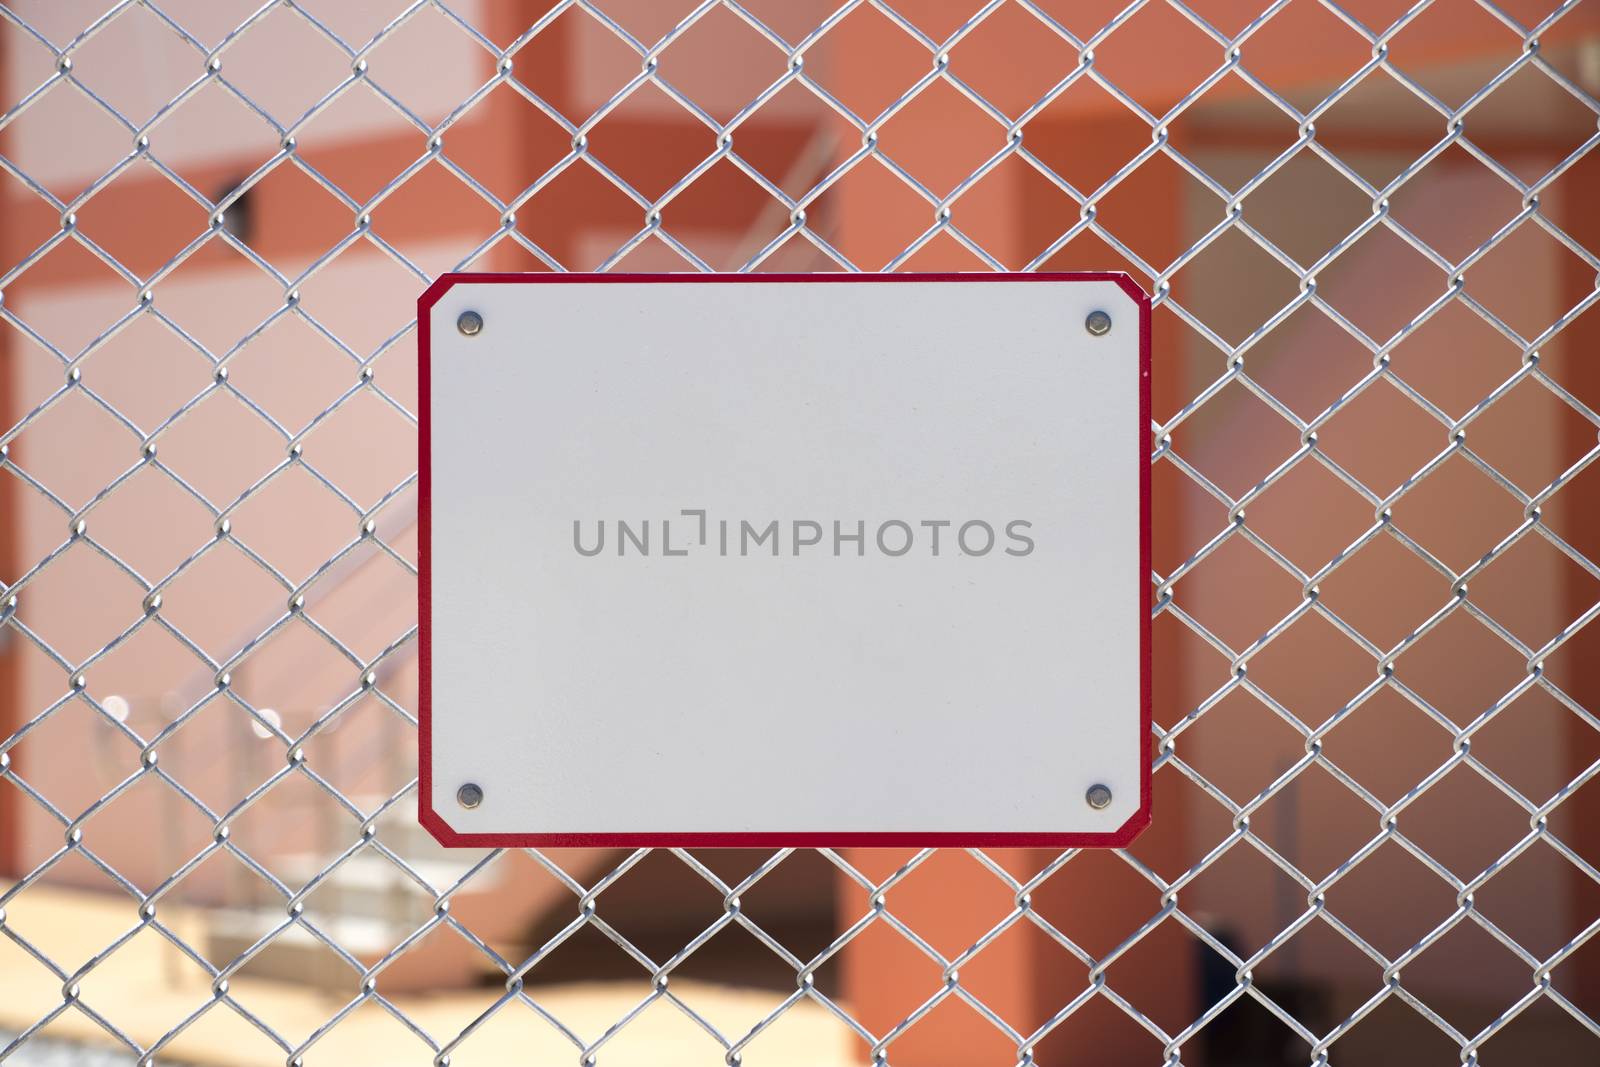 The white metal sign is installed on the metal mesh fence.